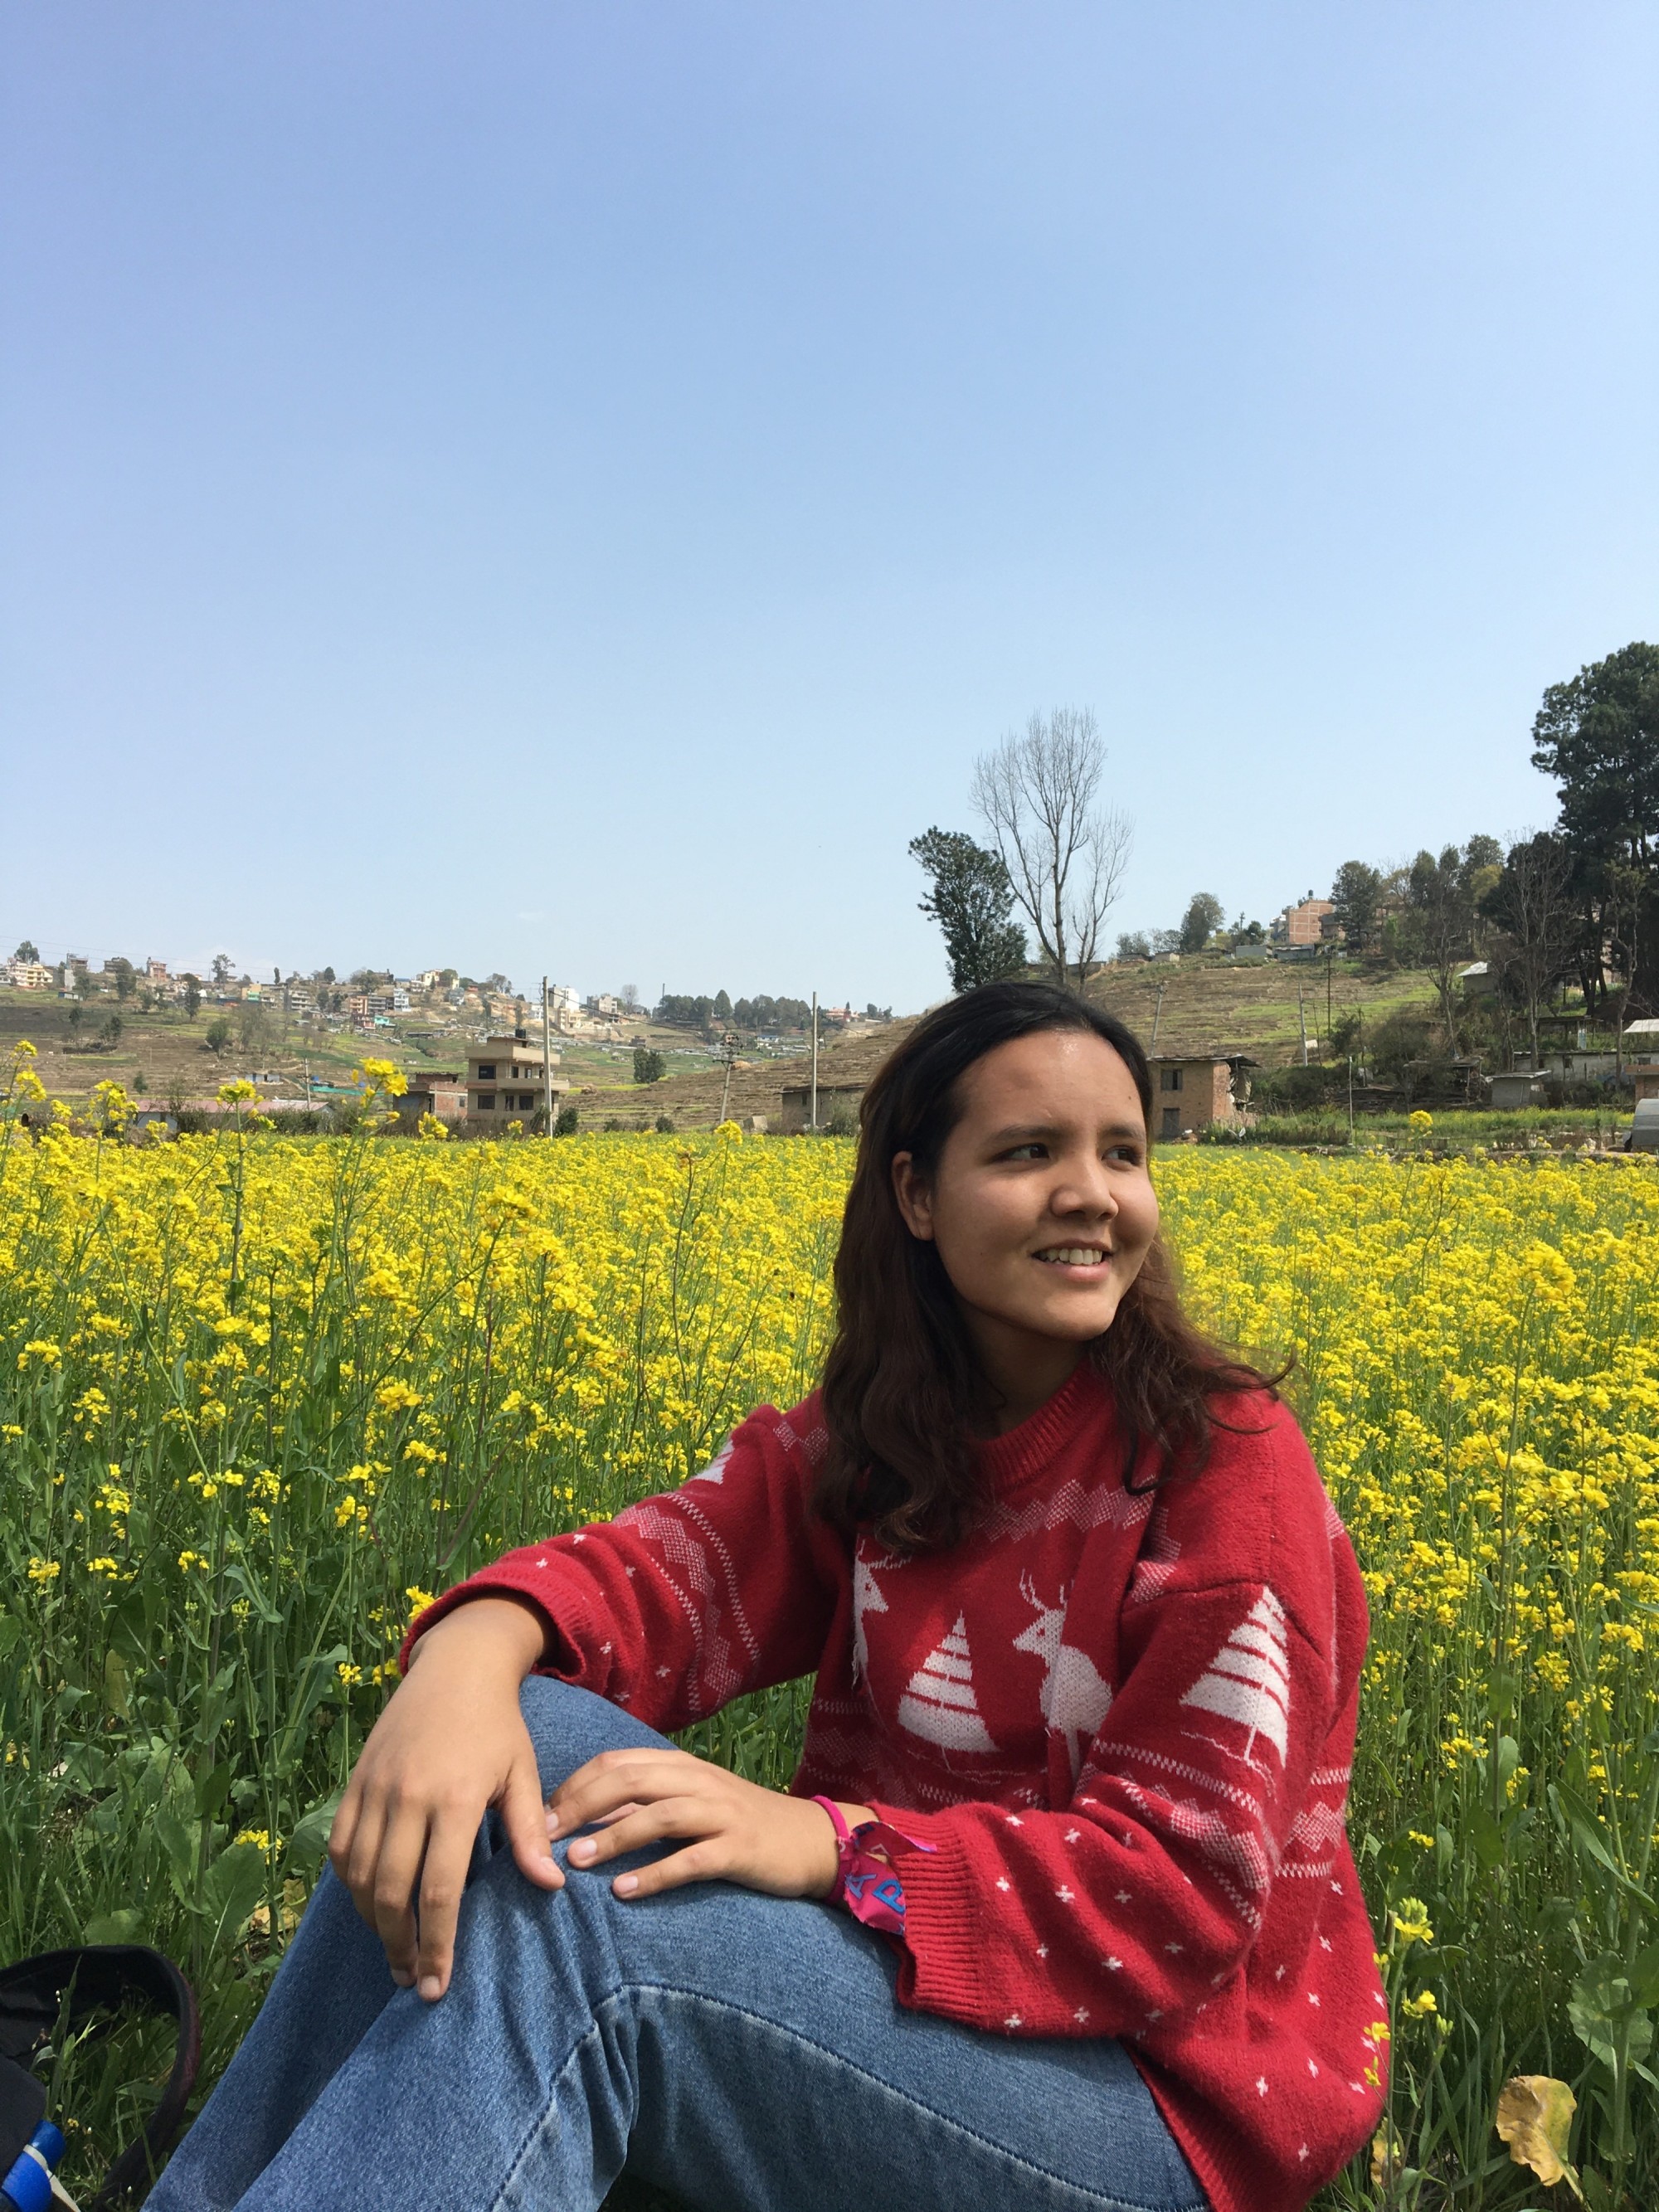 Shuvangi Khadka sits in a field of yellow flowers under a blue sky, wearing a red sweater and smiling, looking away from the camera